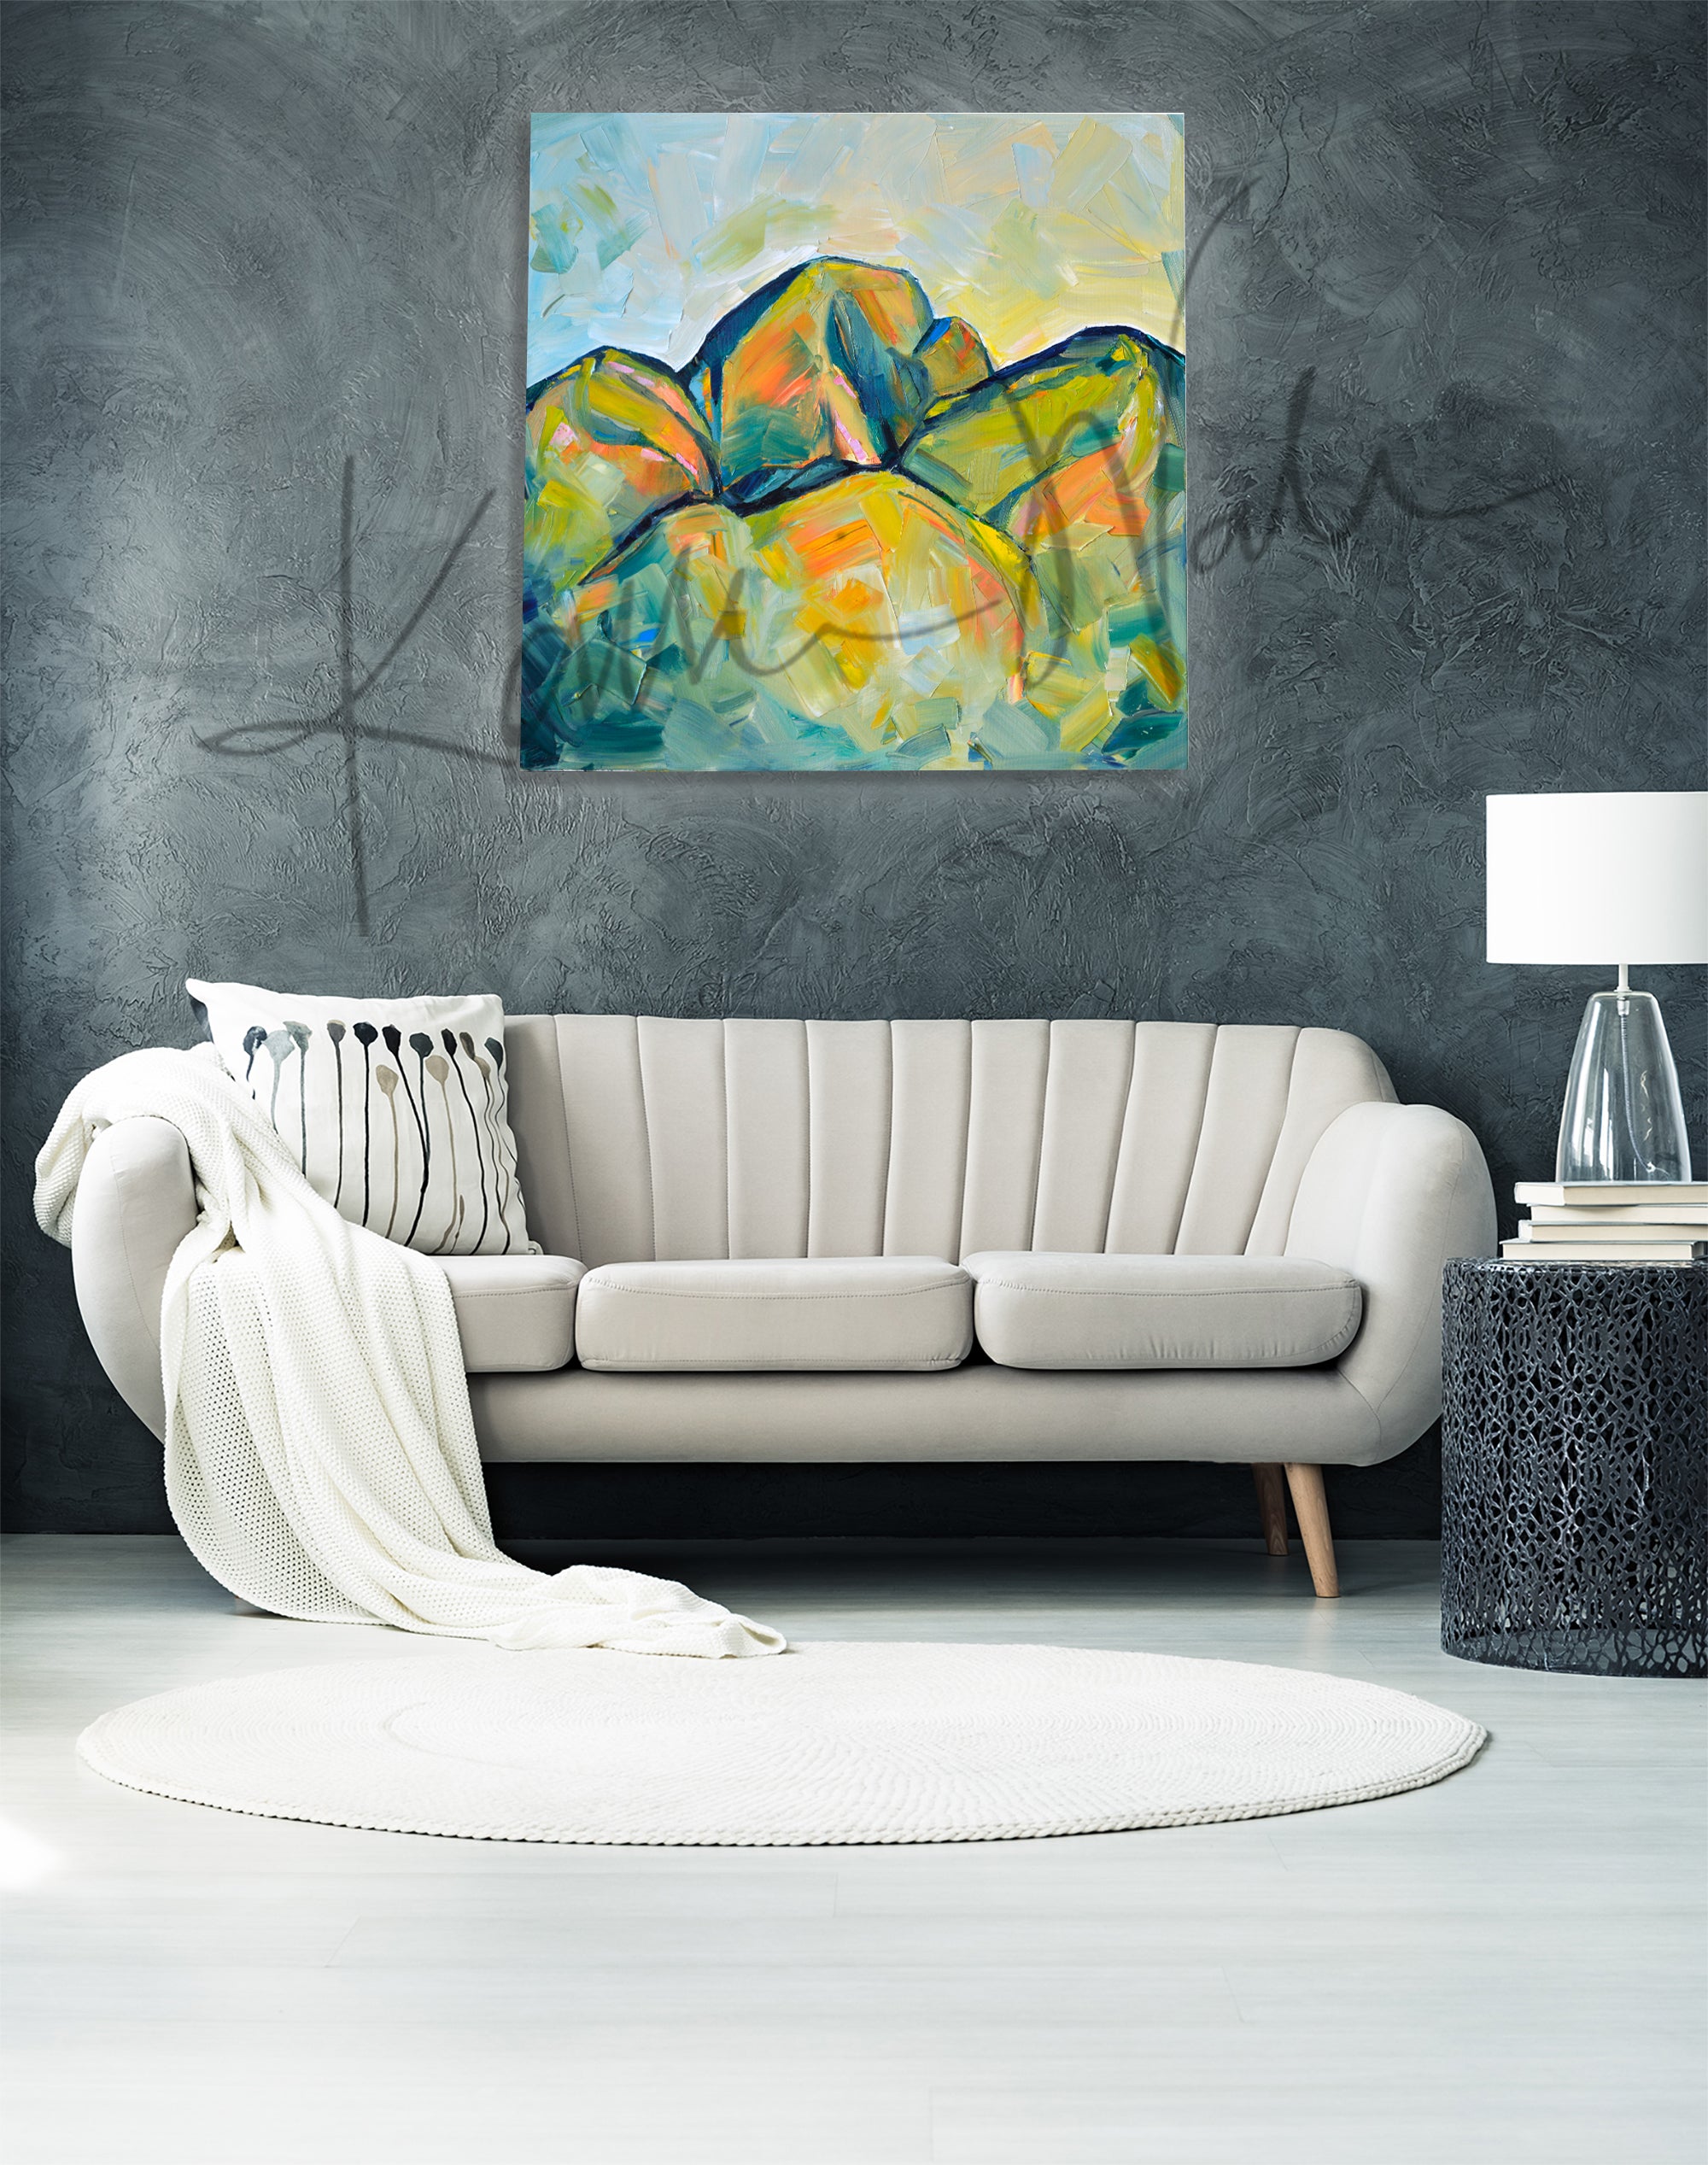 Oil painting of an abstract molar tooth painted to look like mountains. The painting is hanging over a beige couch.